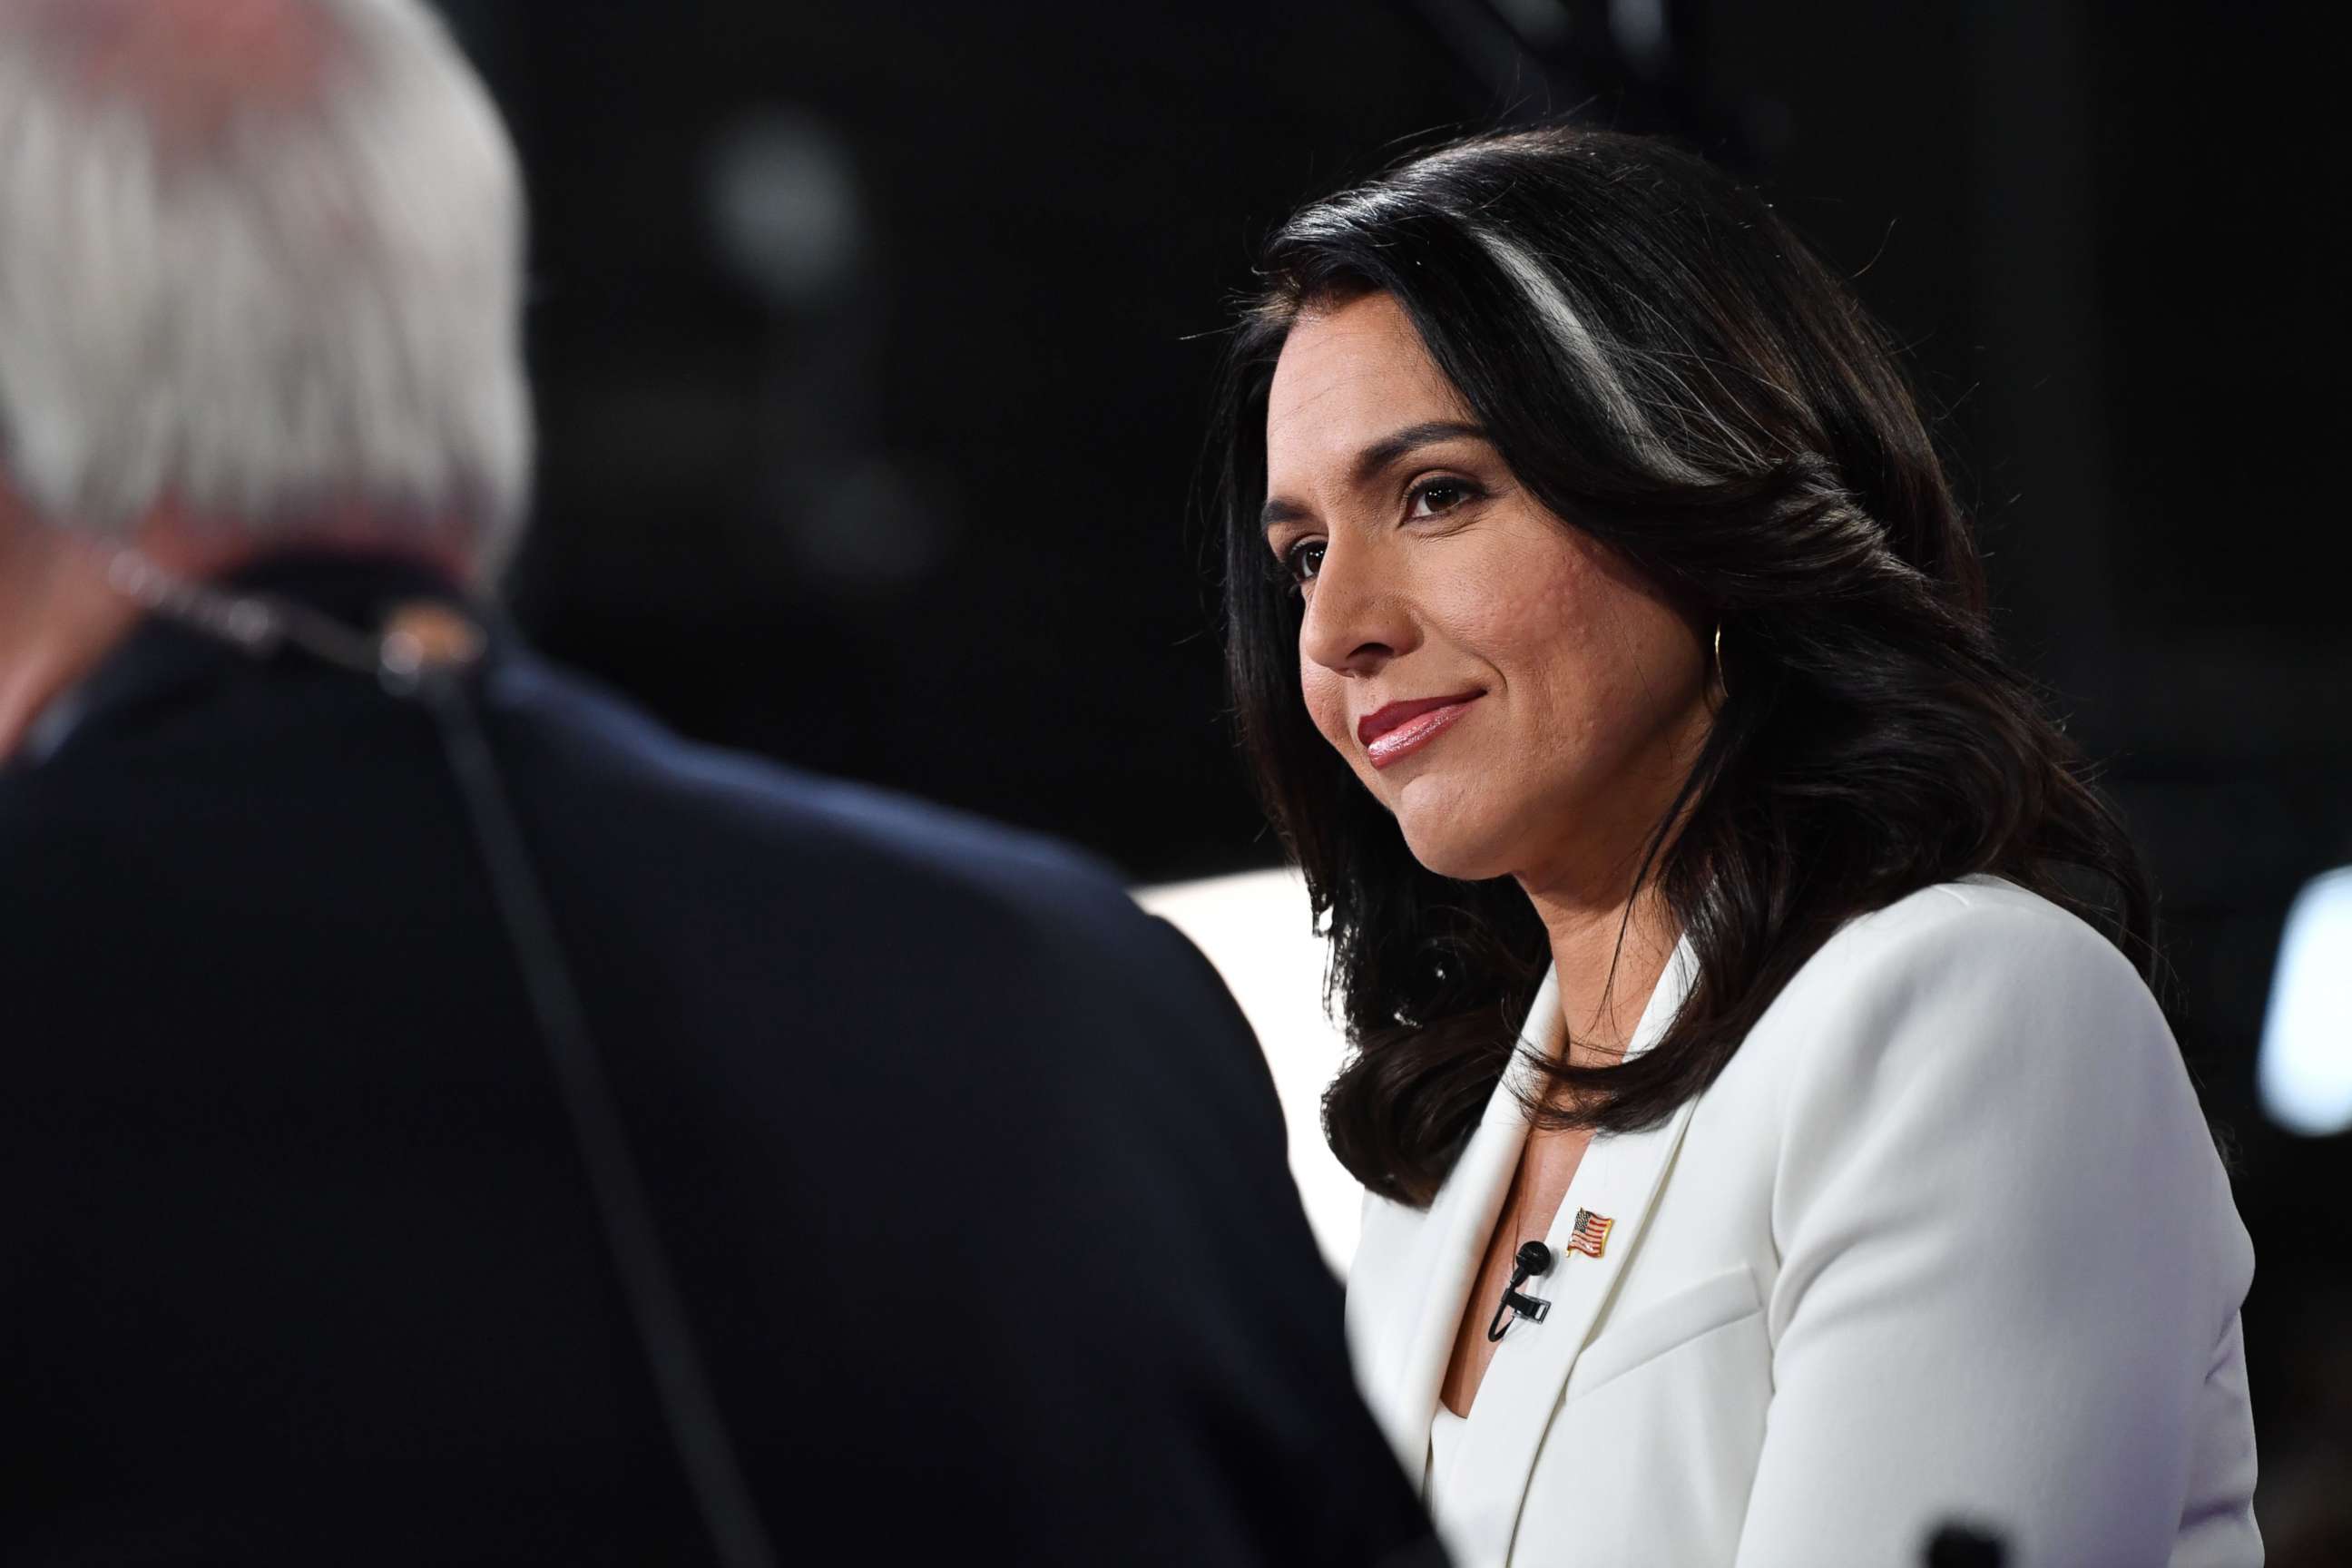 PHOTO: Democratic presidential hopeful Rep. Tulsi Gabbard speaks to the press in the Spin Room following the fifth Democratic primary debate at Tyler Perry Studios in Atlanta, Nov. 20, 2019.